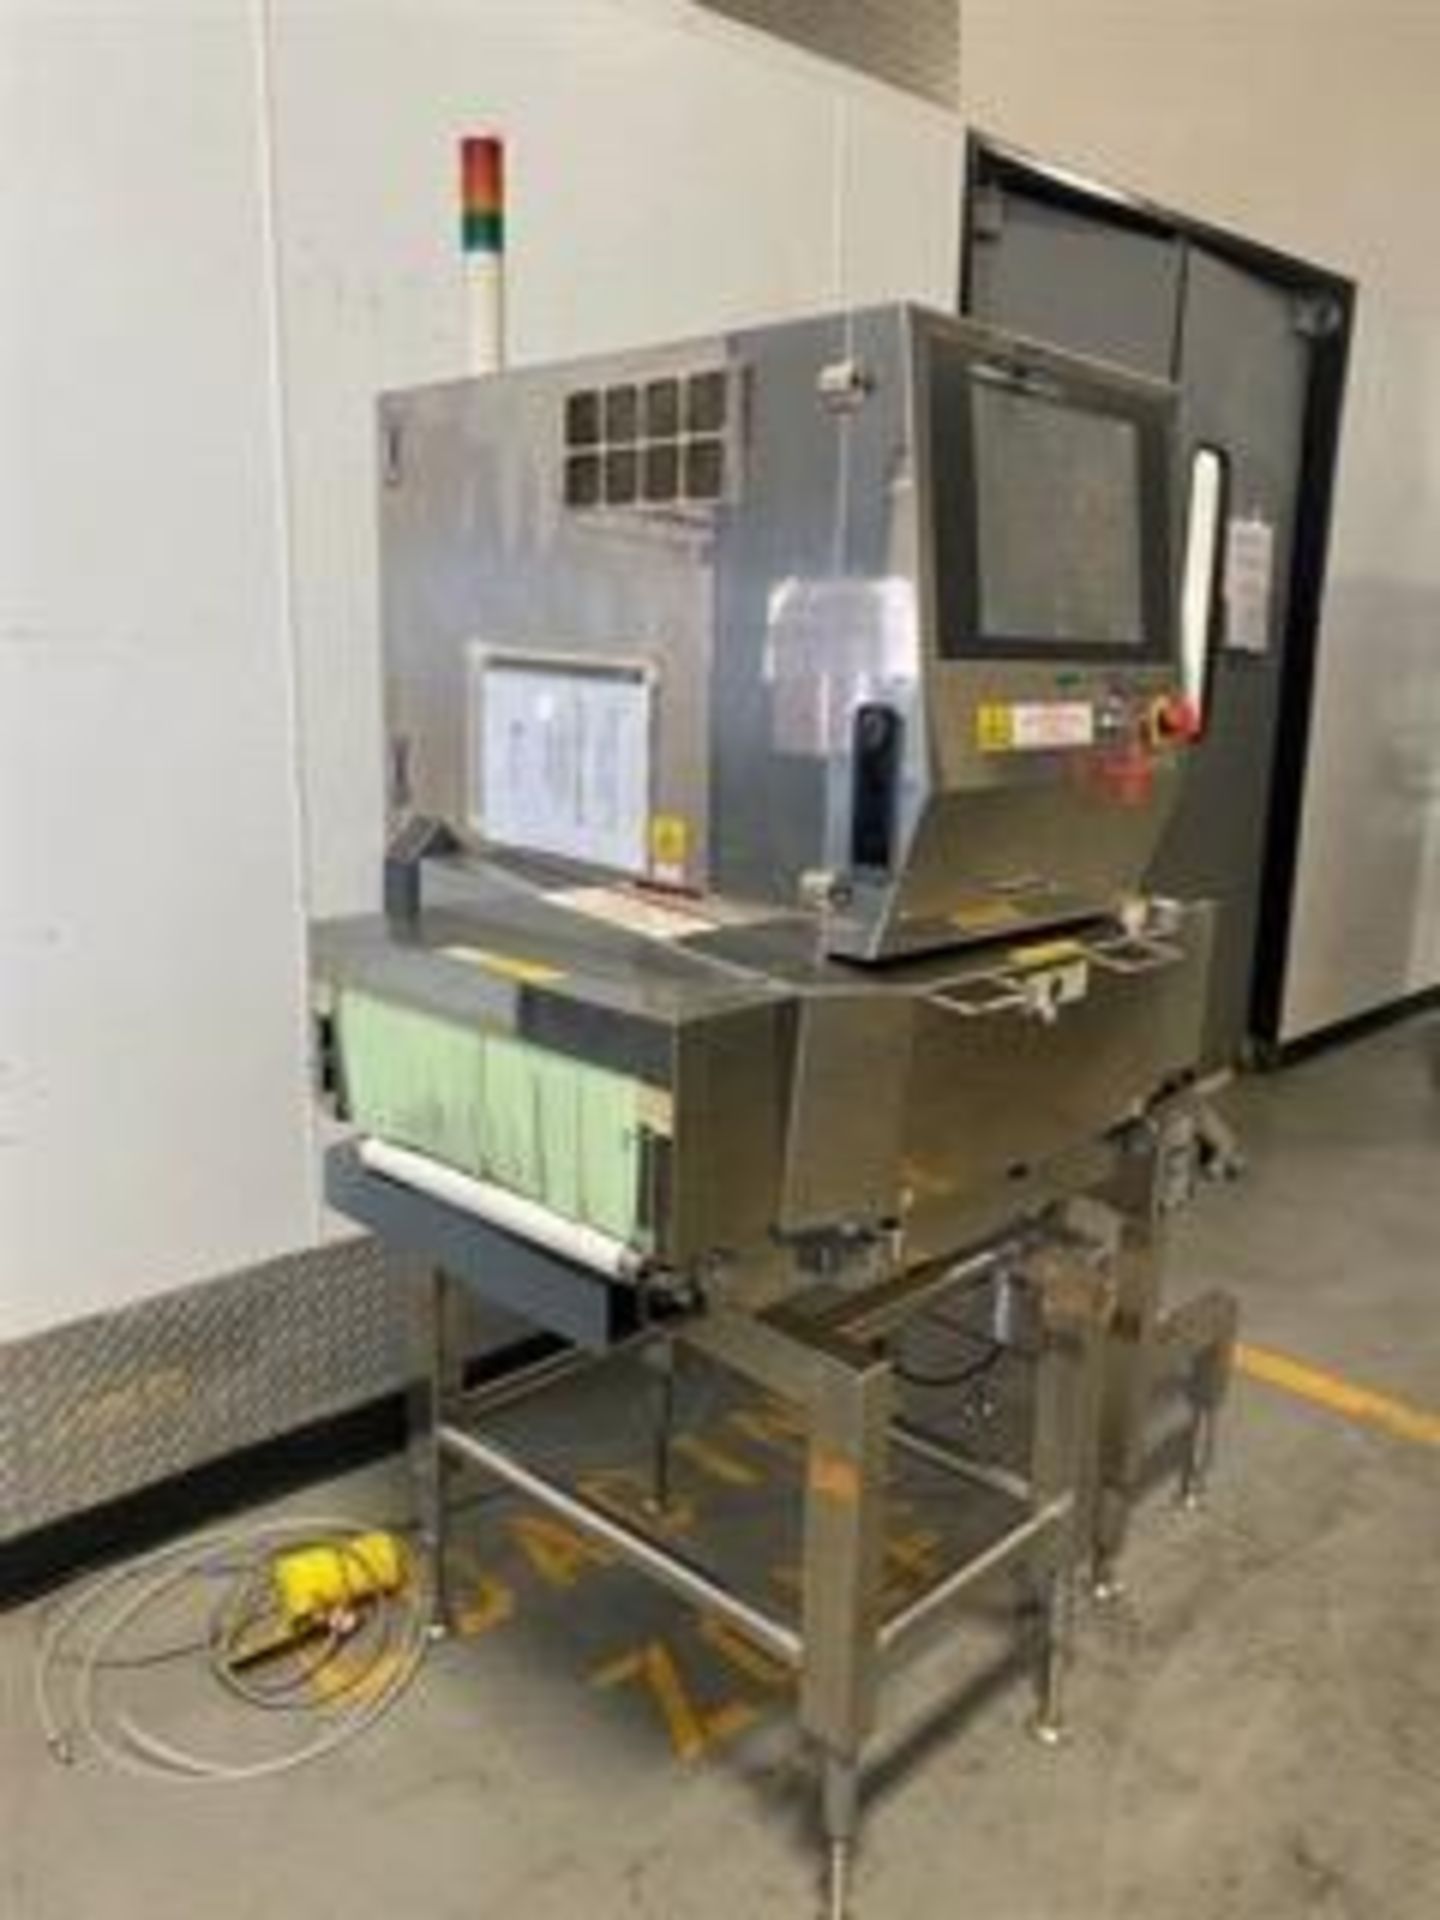 Anritsu X-ray Inspection Machine #4600 w/ Ejection Station - Image 3 of 4